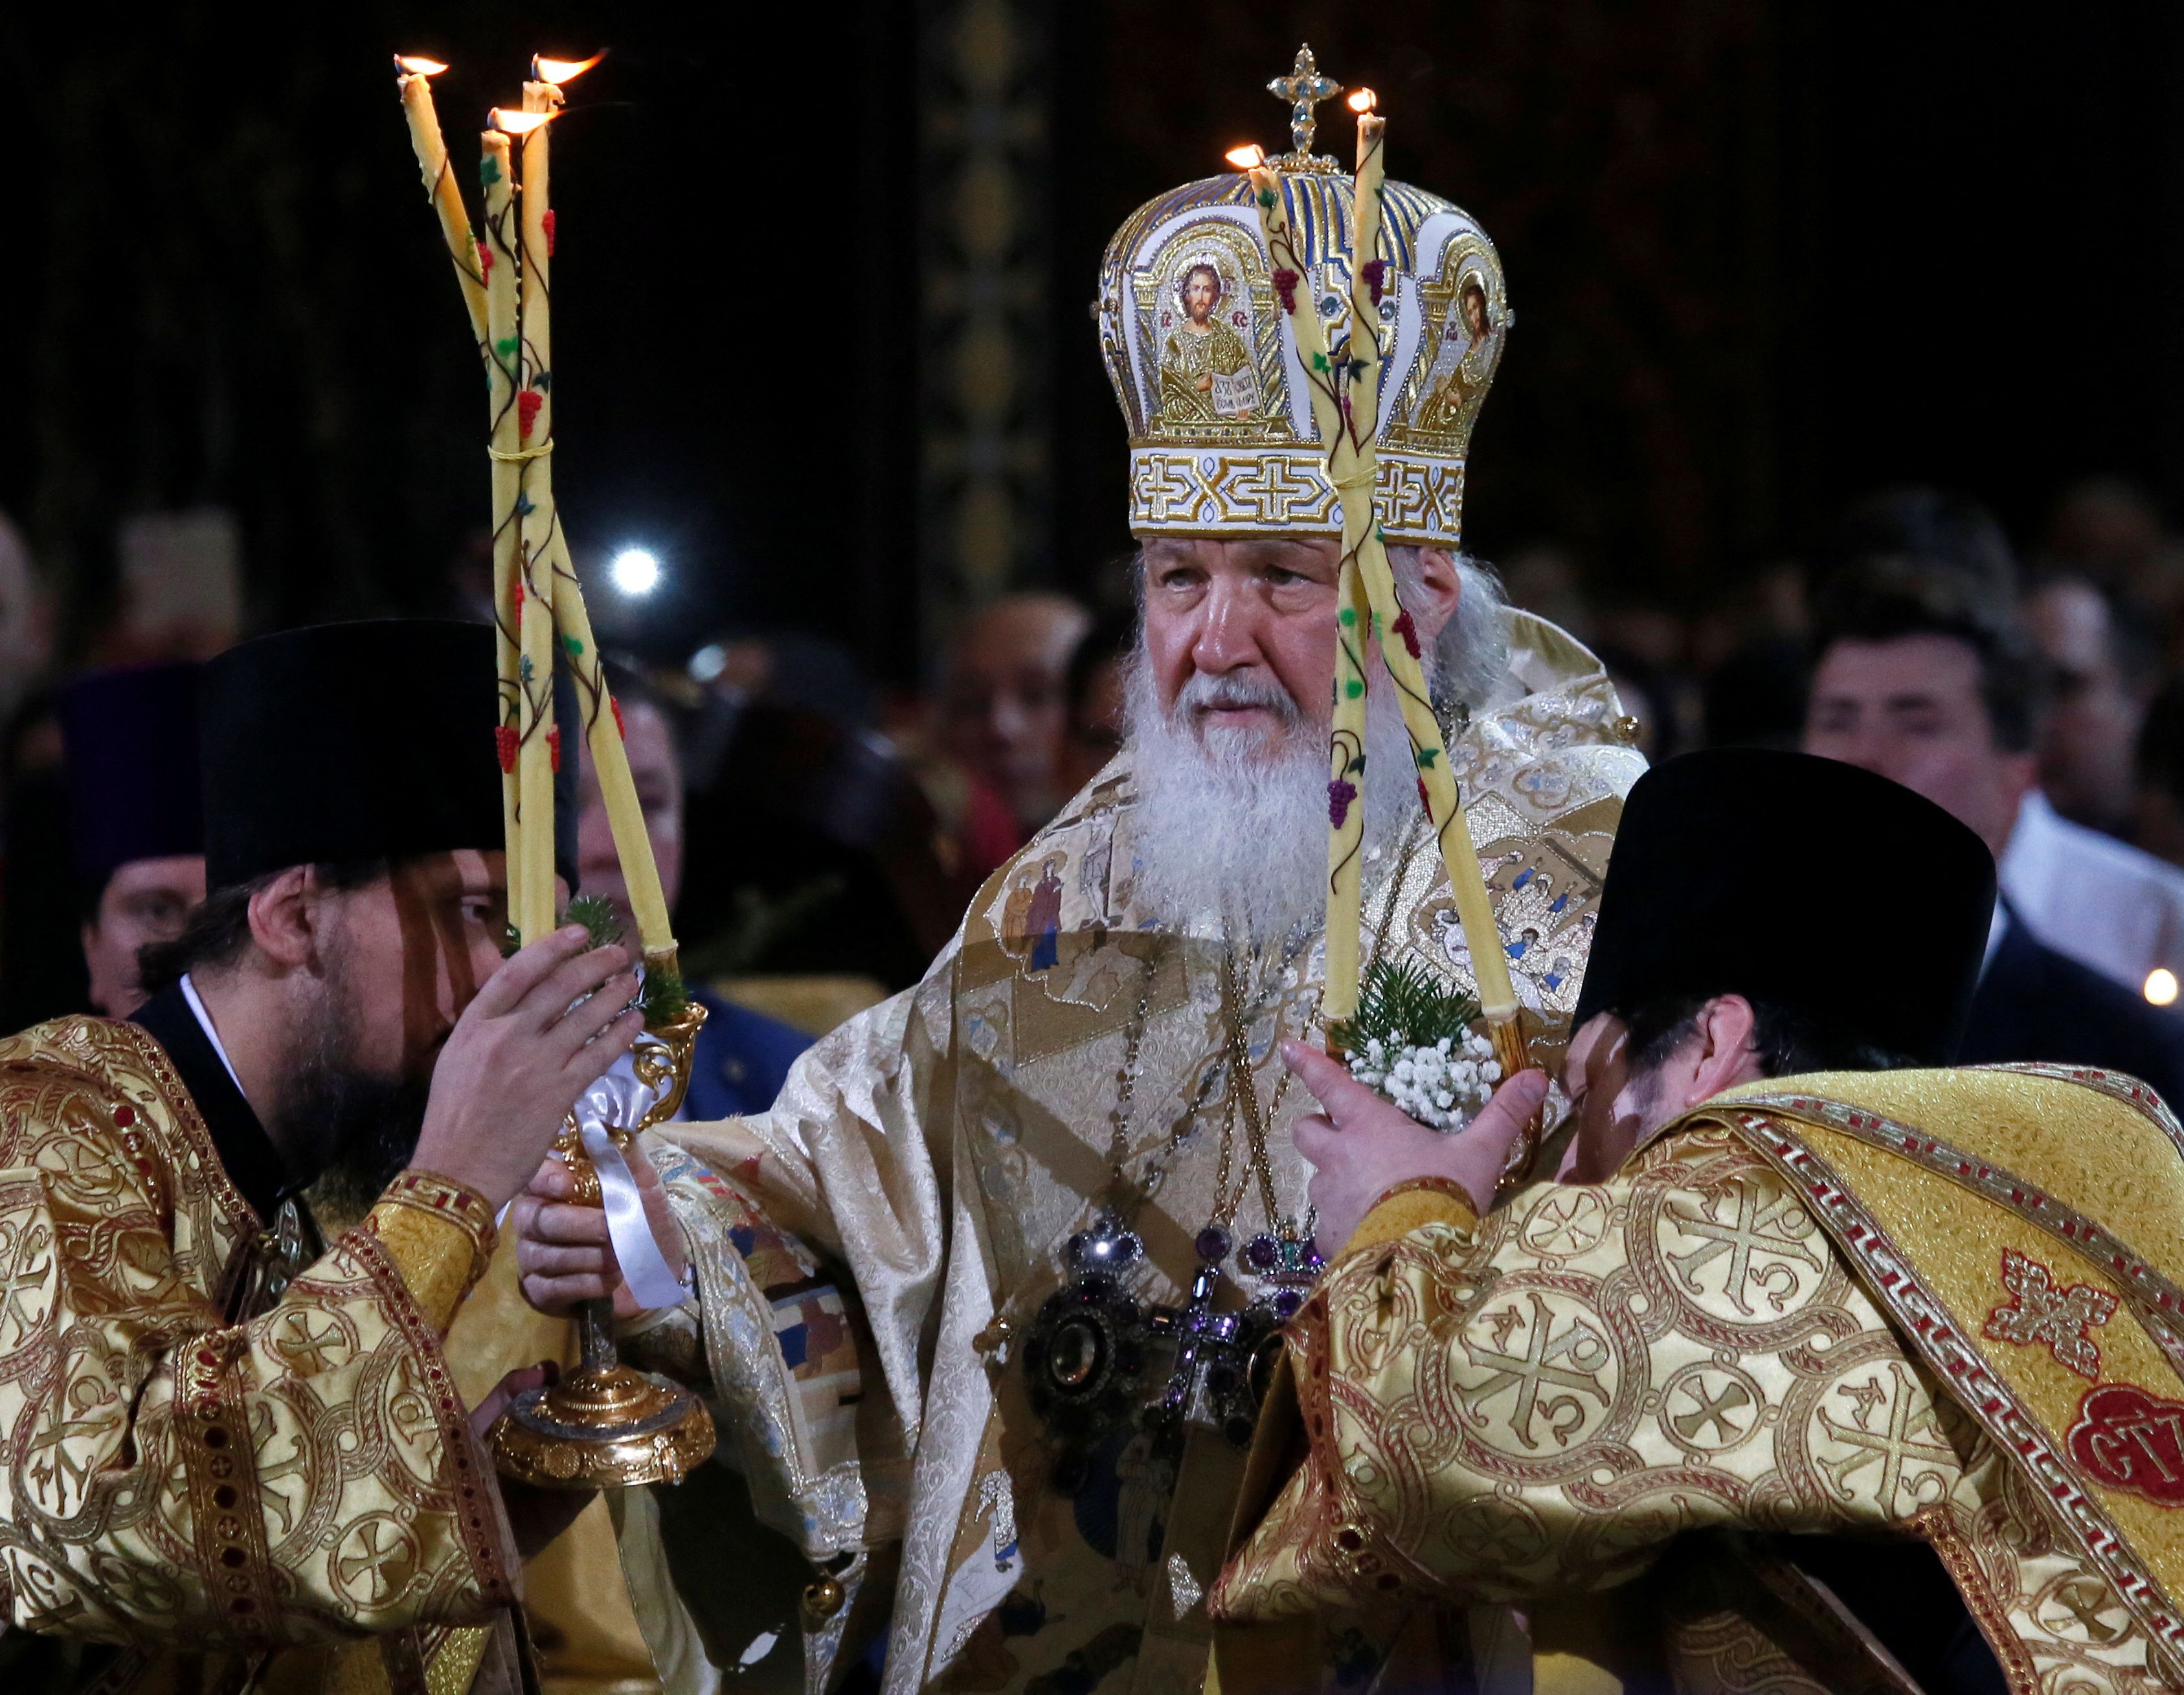 Patriarch Kirill, the head of the Russian Orthodox Church, conducts a service on Orthodox Christmas at the Christ the Saviour Cathedral in Moscow